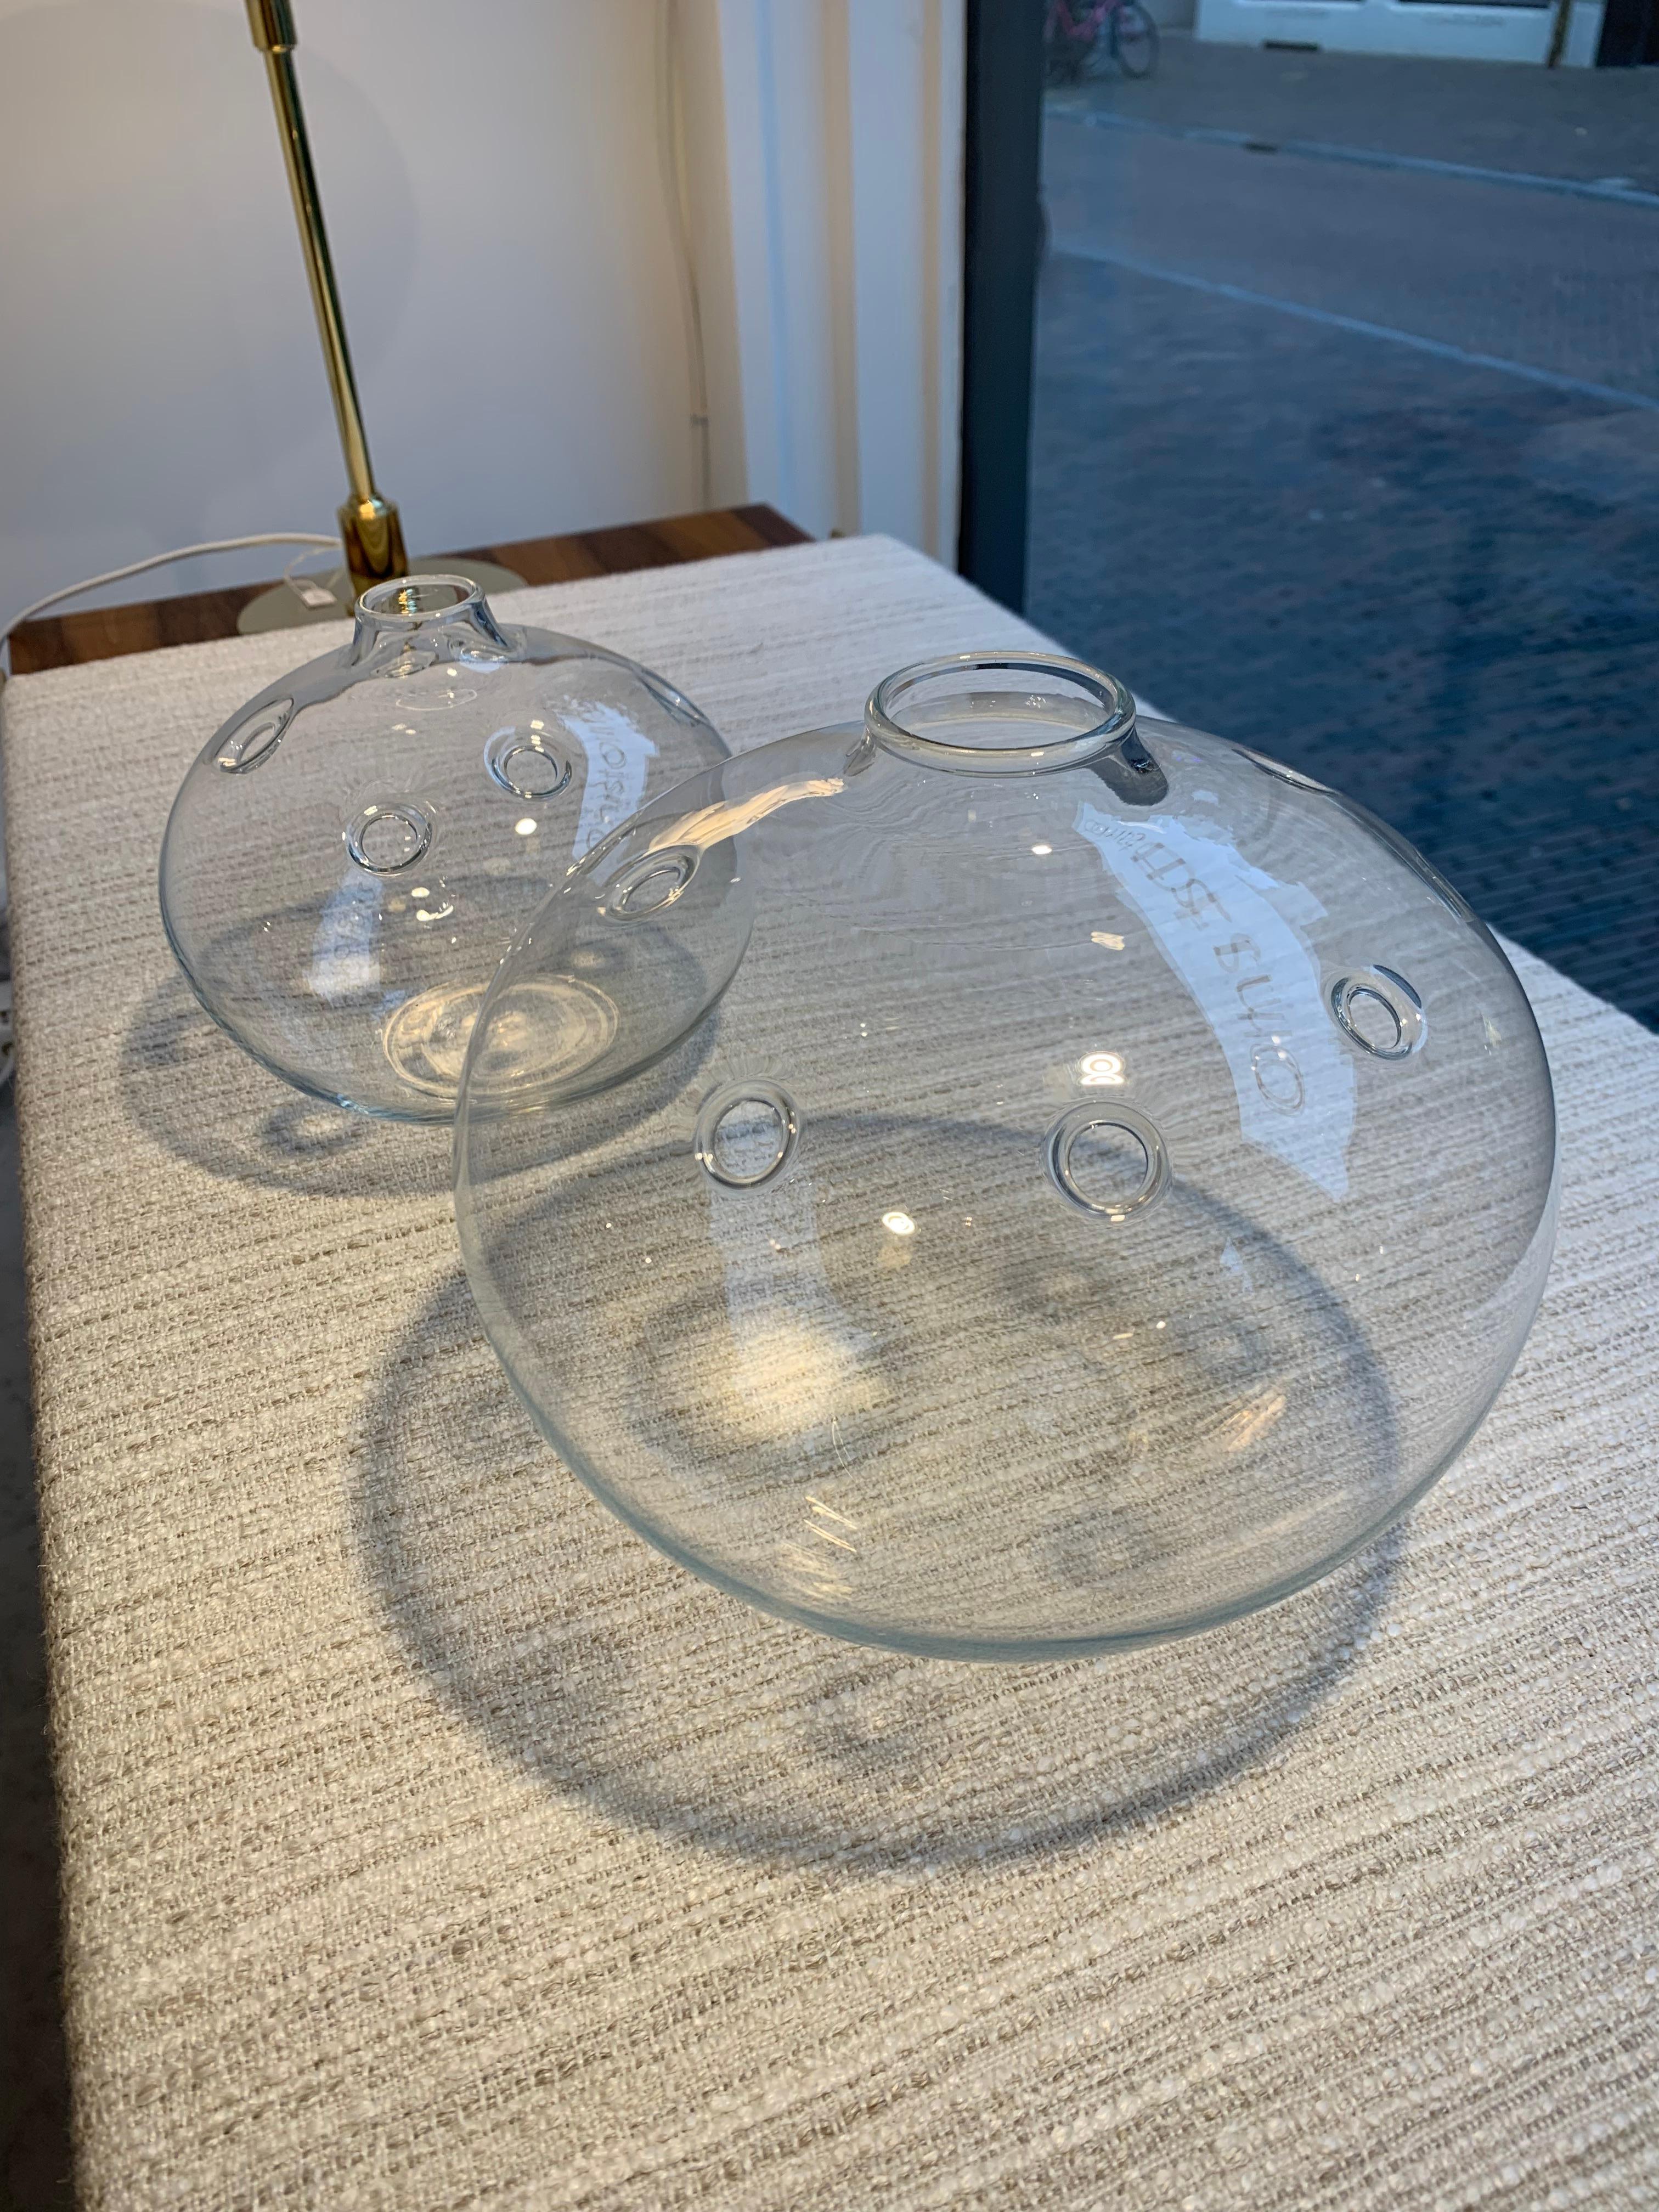 Pair of mouth blown clear glass Hull (hole) vases, designed by Michael Bang for Holmegaard Denmark, 1970s. Produced between 1973-1978.
Vases are executed with multiple holes to place and arrange flowers in, Ikebana style. 

This is the largest size